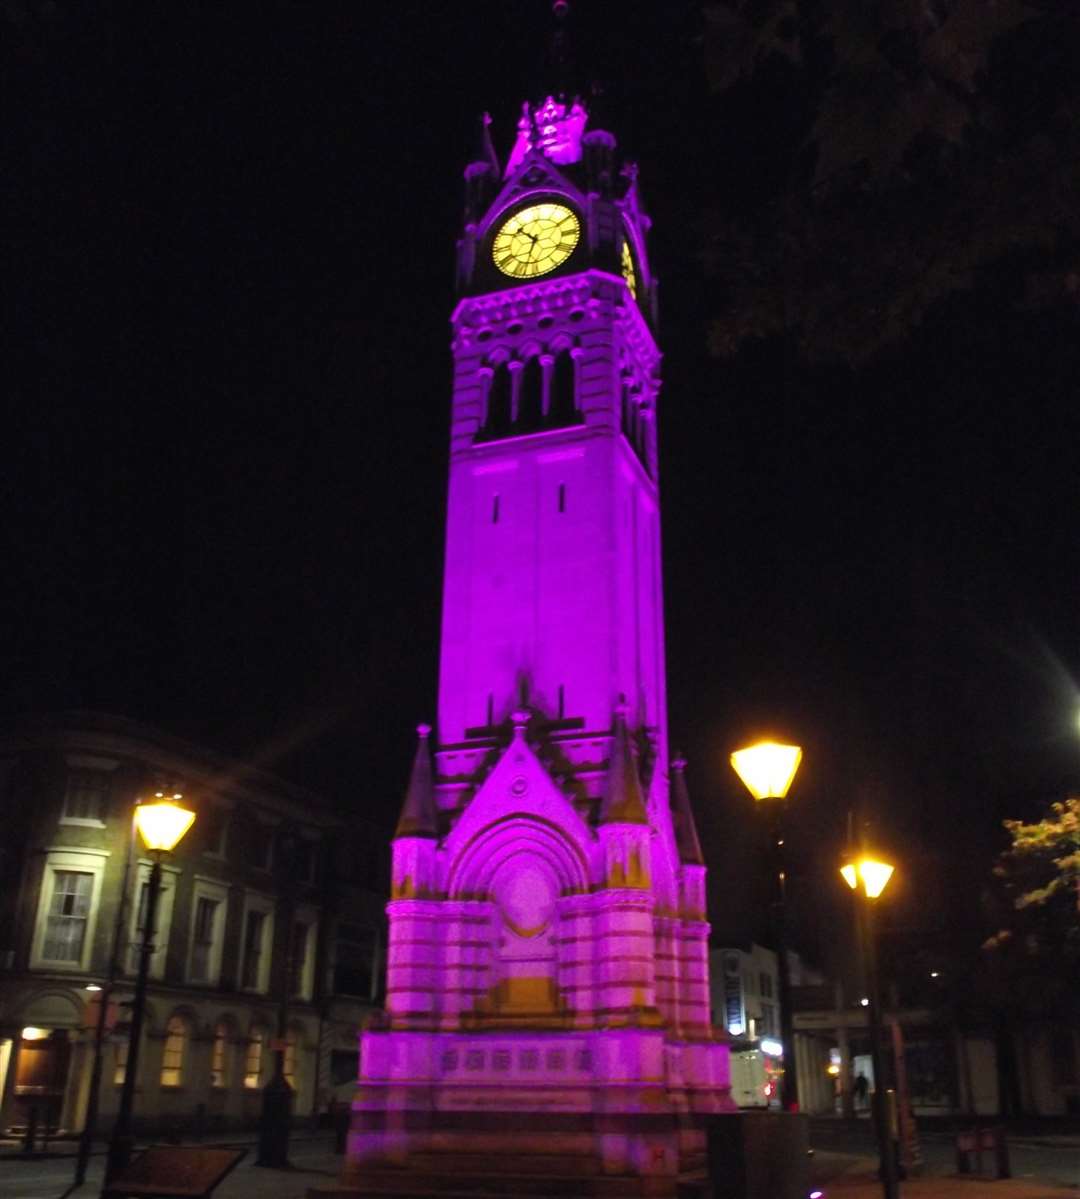 The clock tower will be lit up purple once again. Photo: Brian Portway